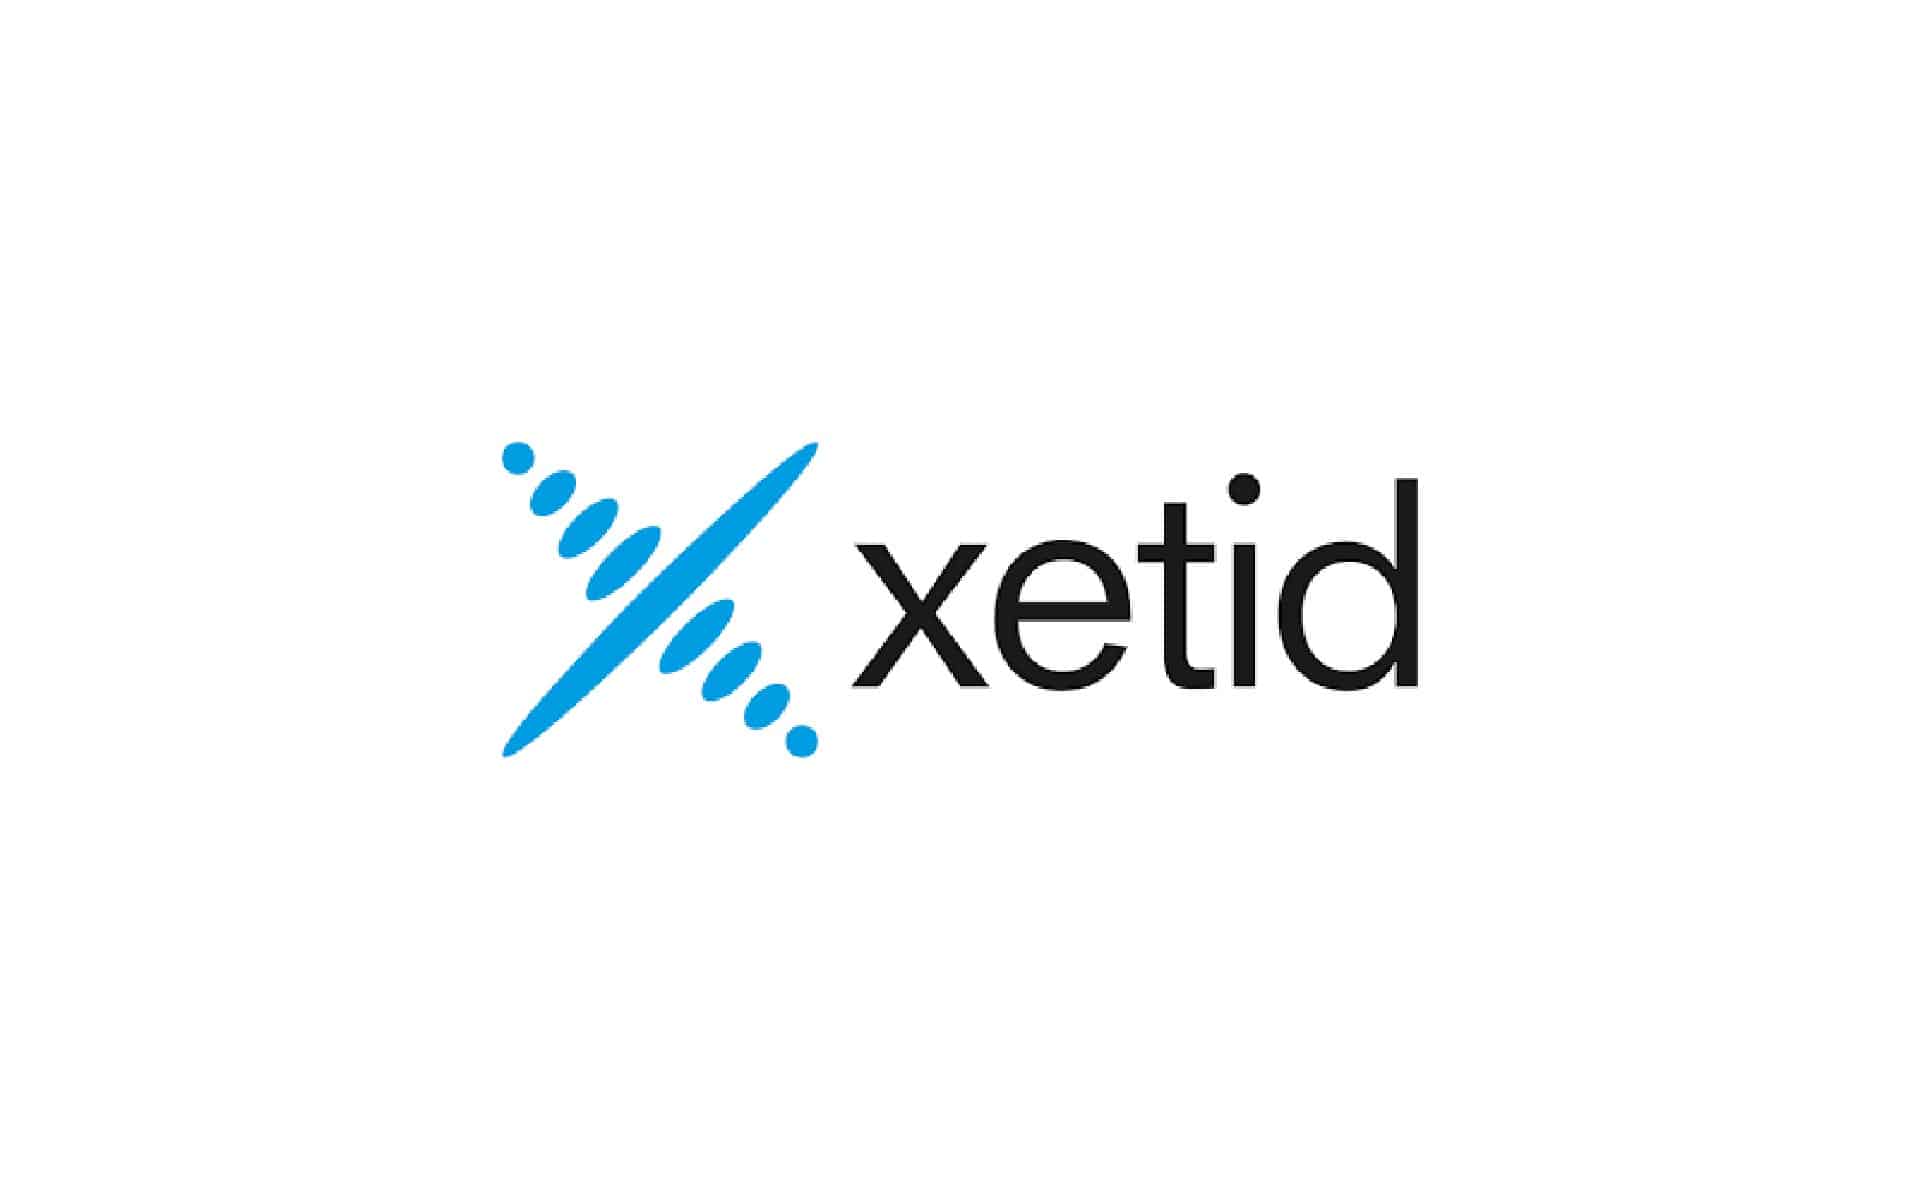 xetid